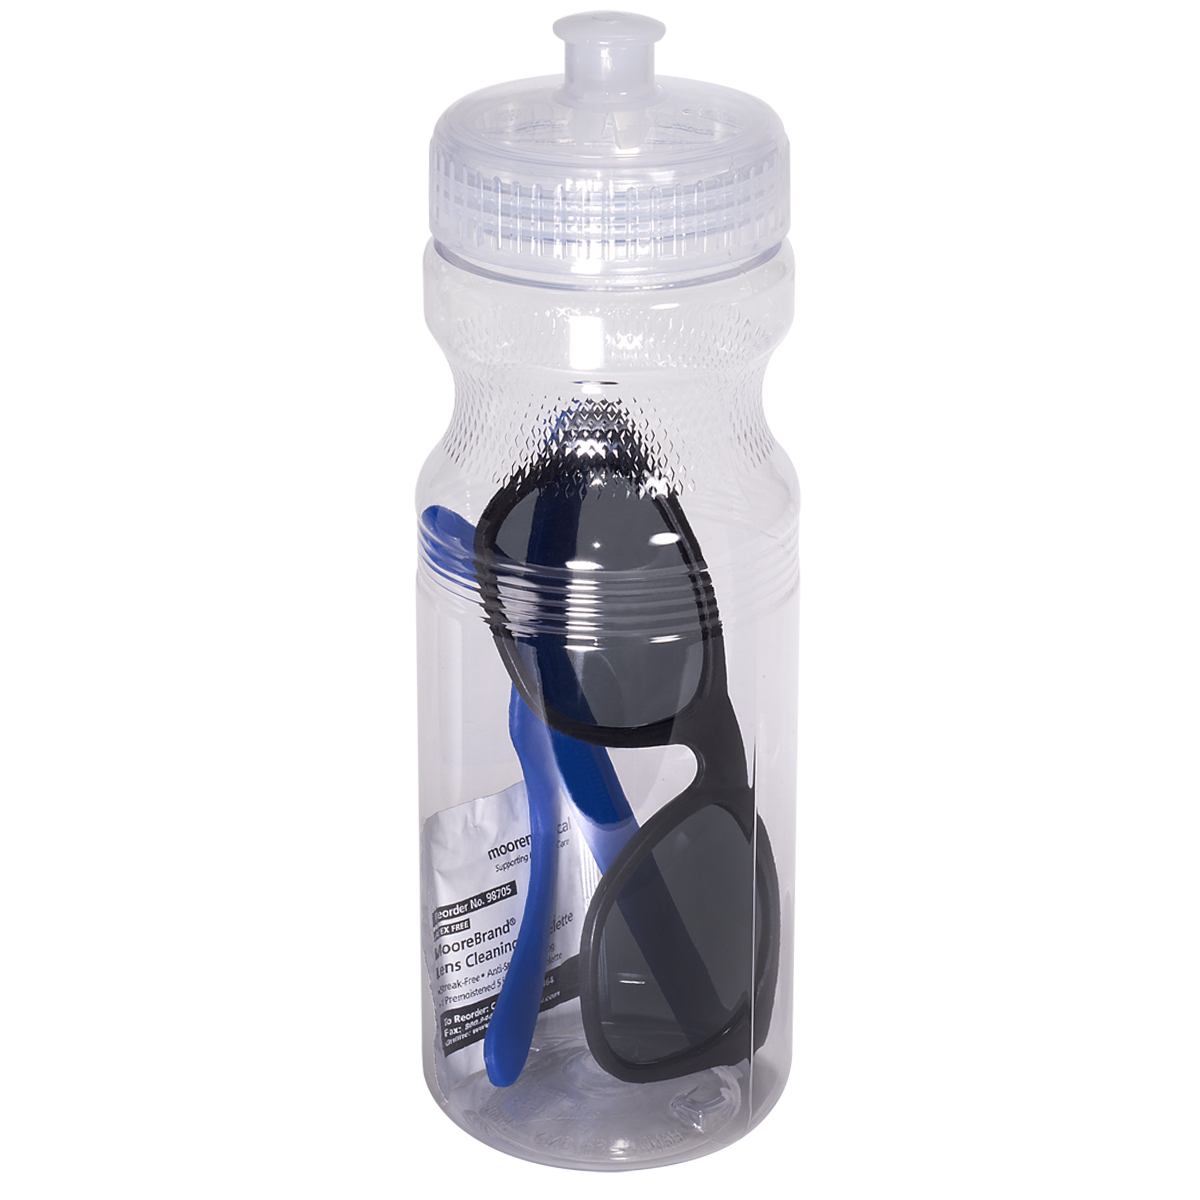 Sunglasses & Lens Cleaning Wipe in 24 oz. Sports Bottle